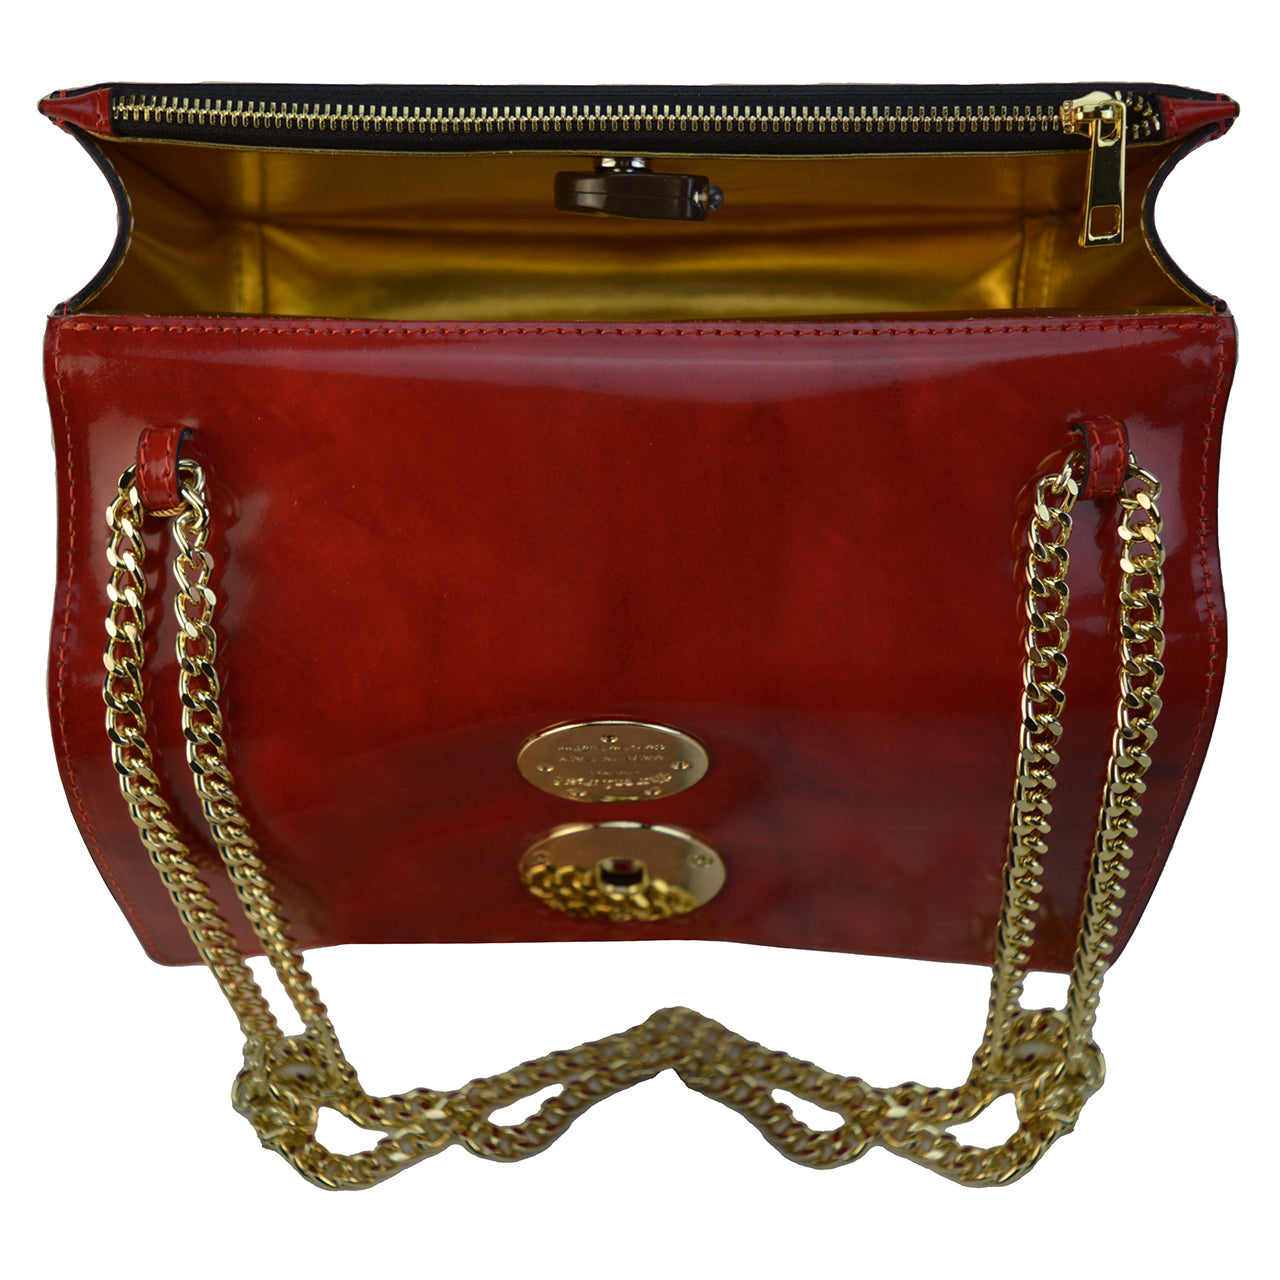 Pratesi Le Falle R194 Lady bag with chain shoulder